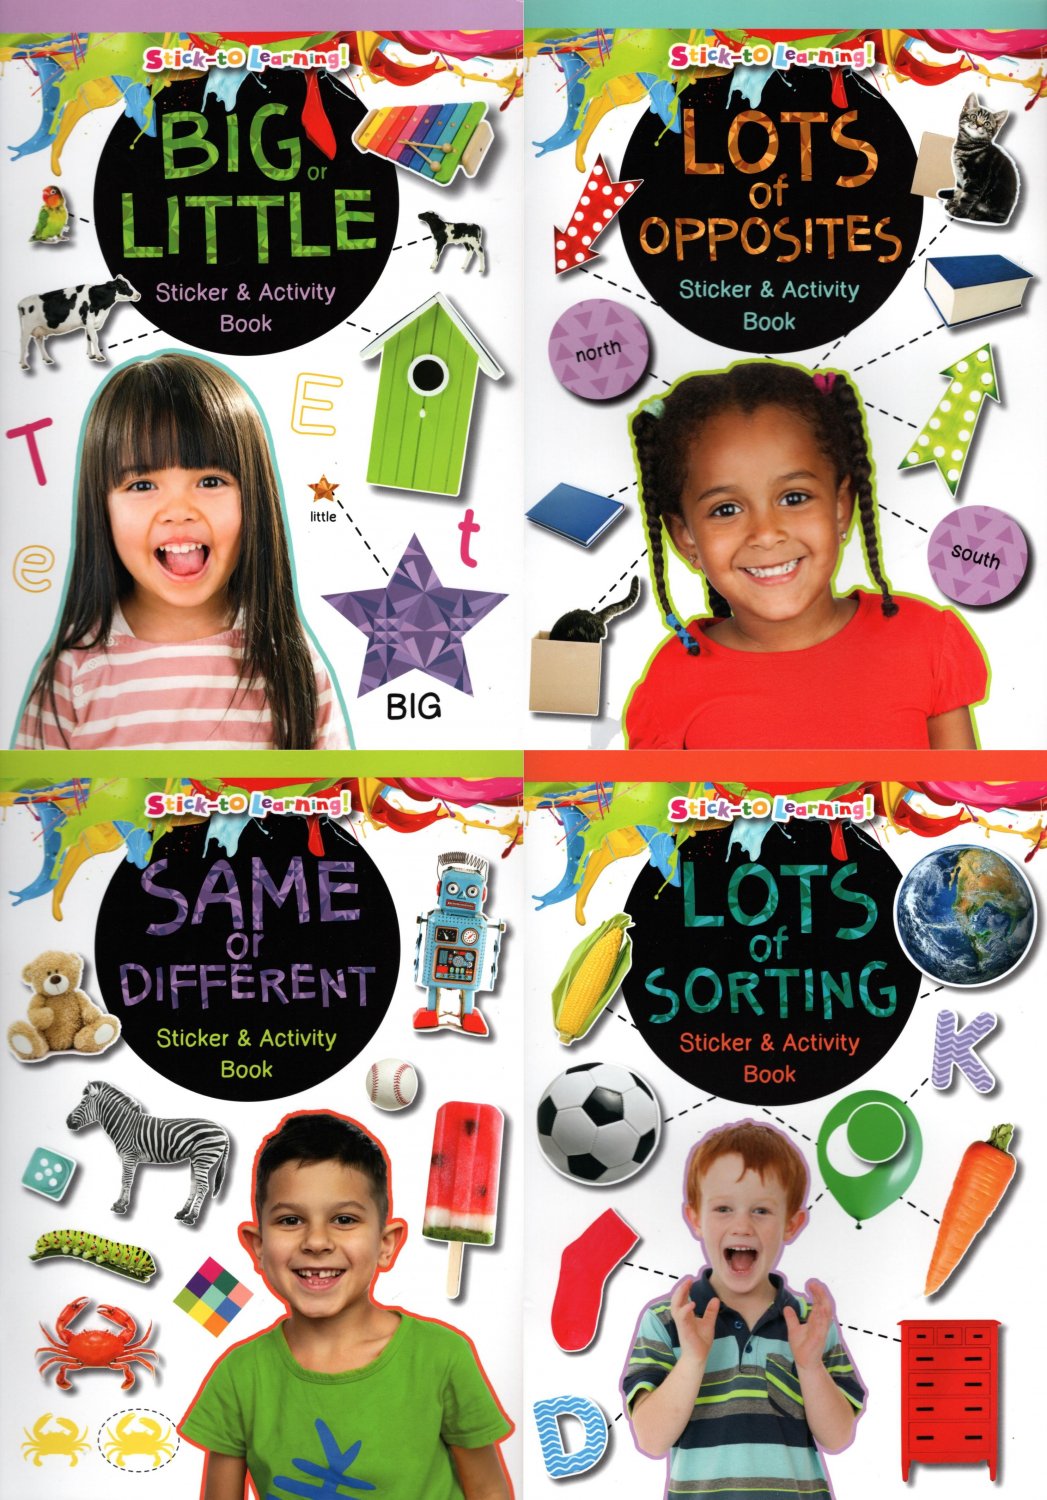 Lots of Sorting, Lots of Different, Lots of Opposites, Big or Little - Sticker & Activity Book